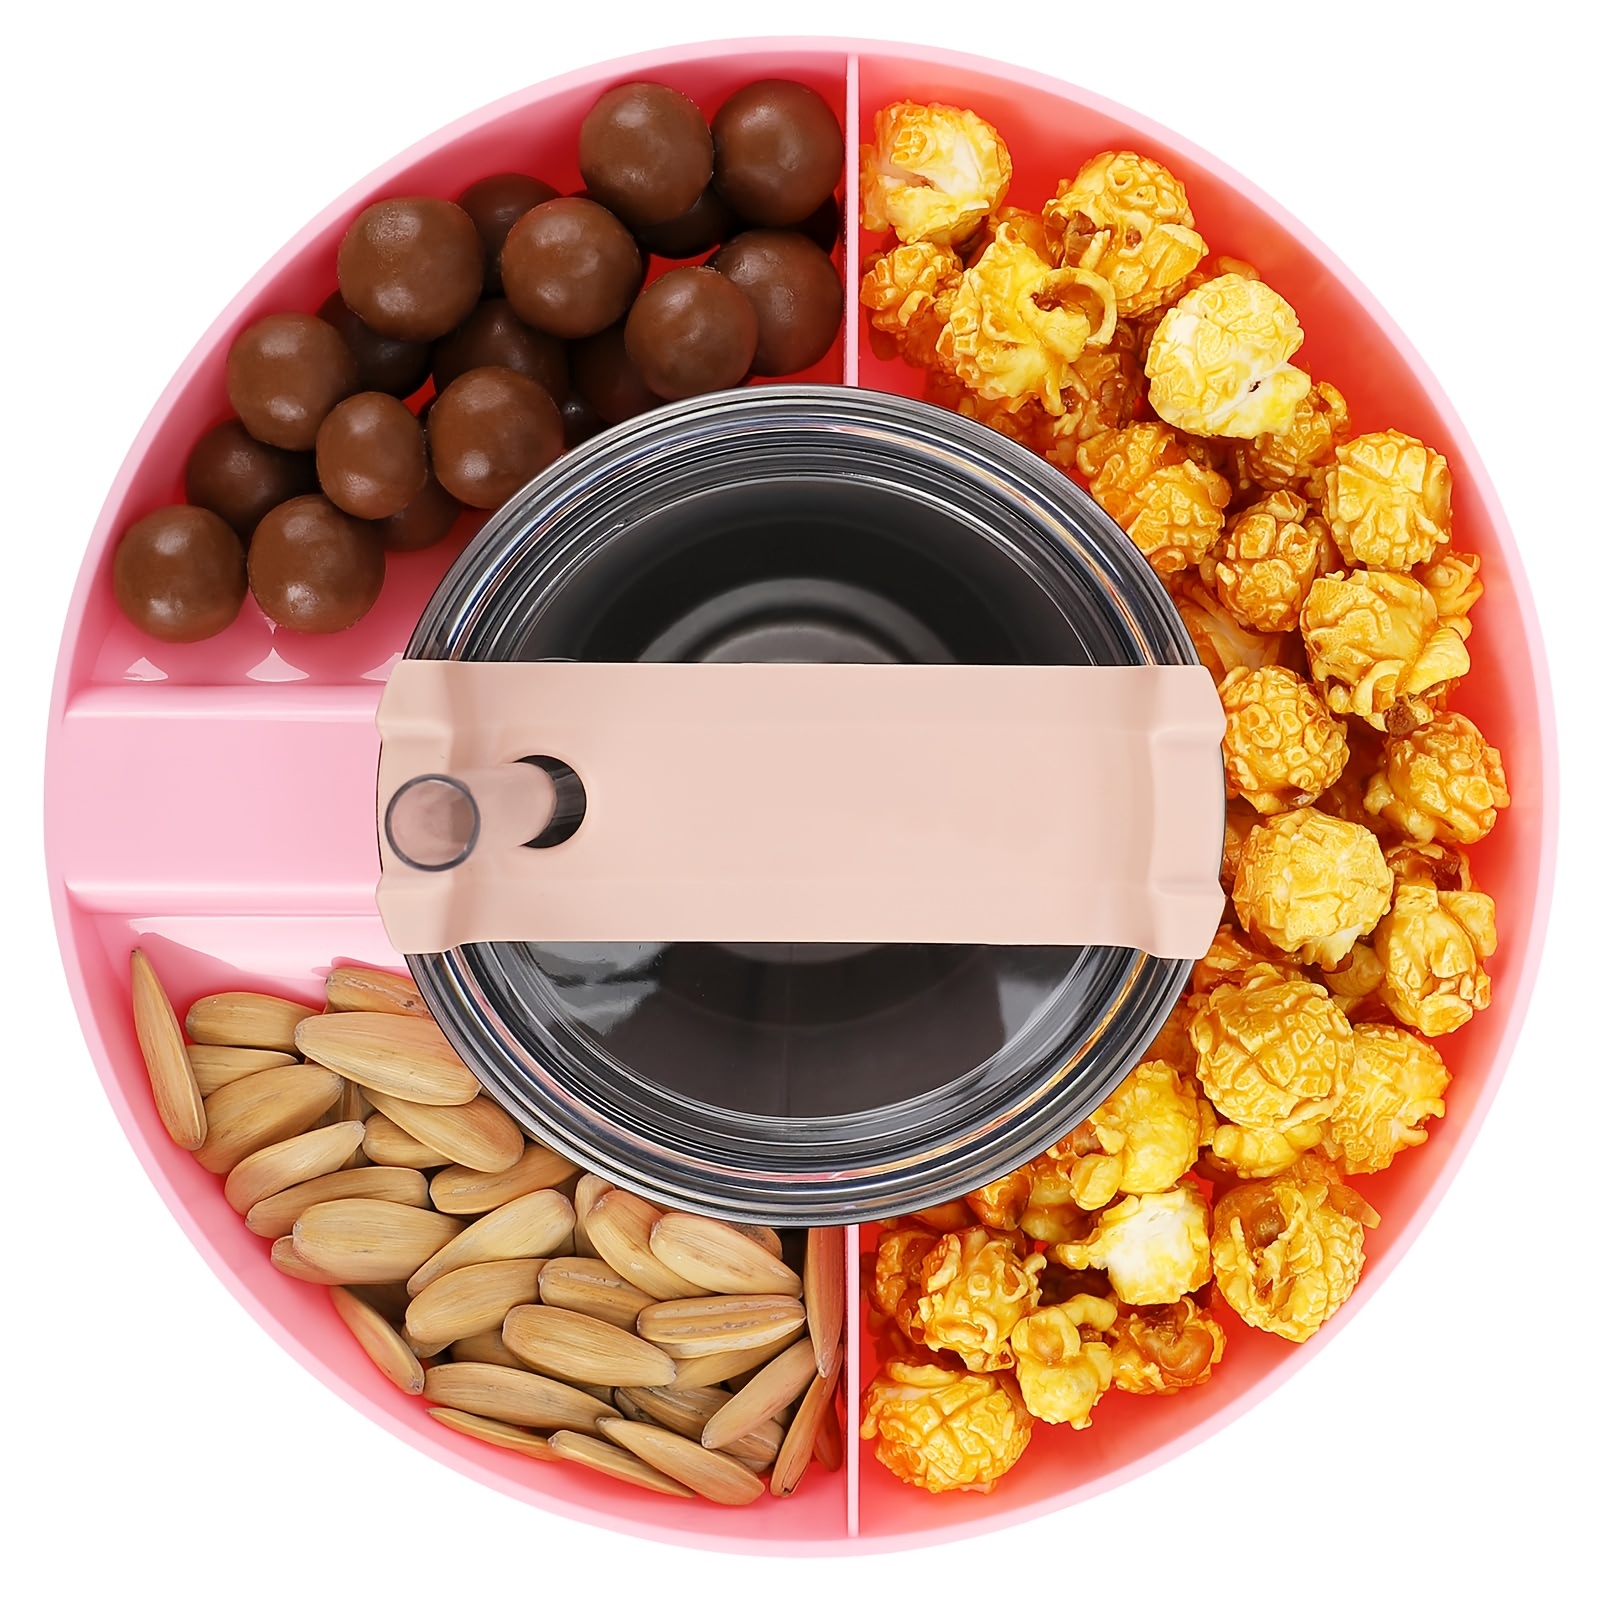 Snack Spinner, Best Snack Container